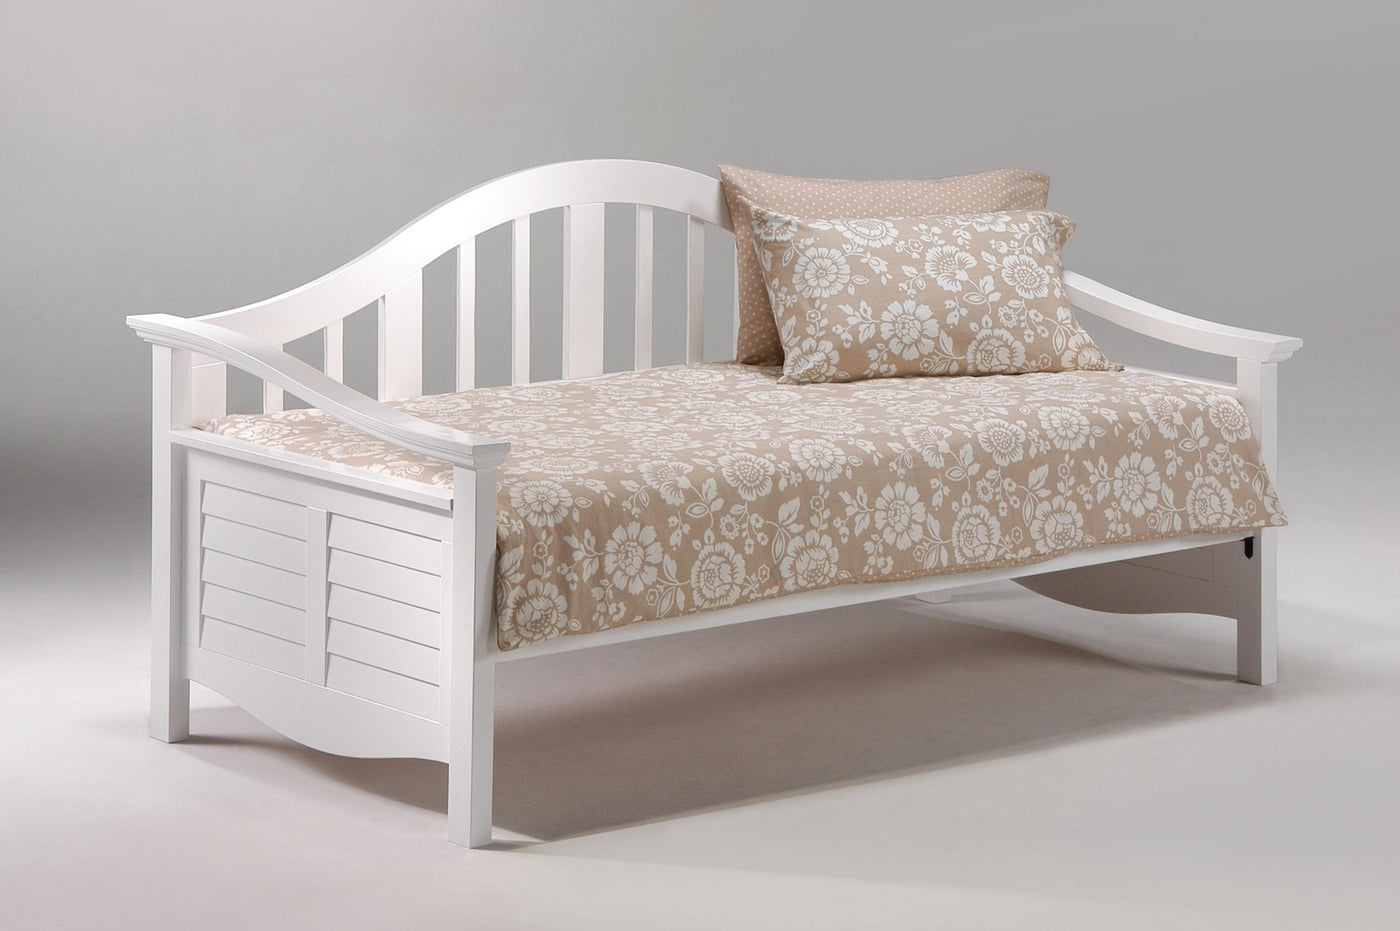 Seagull Daybed